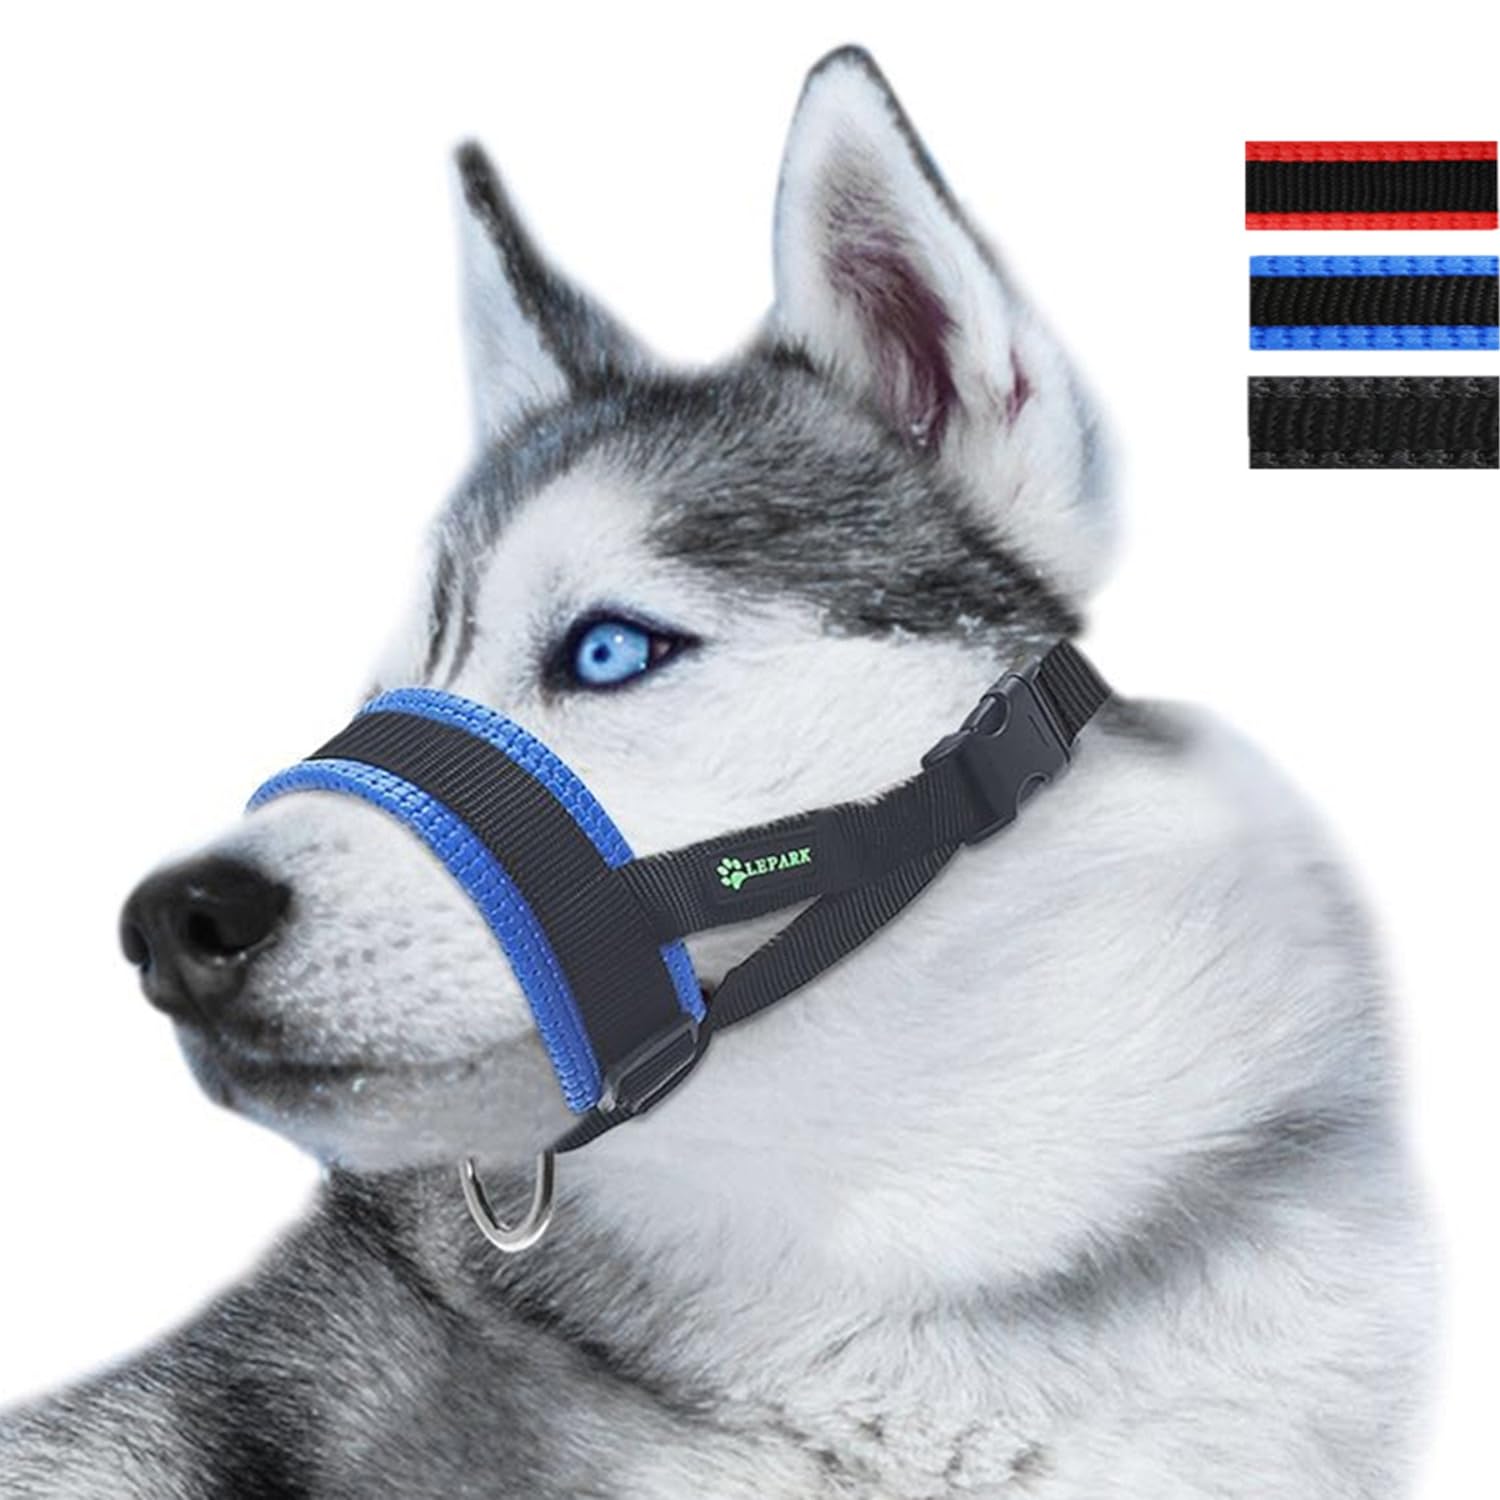 muzzle for barking control